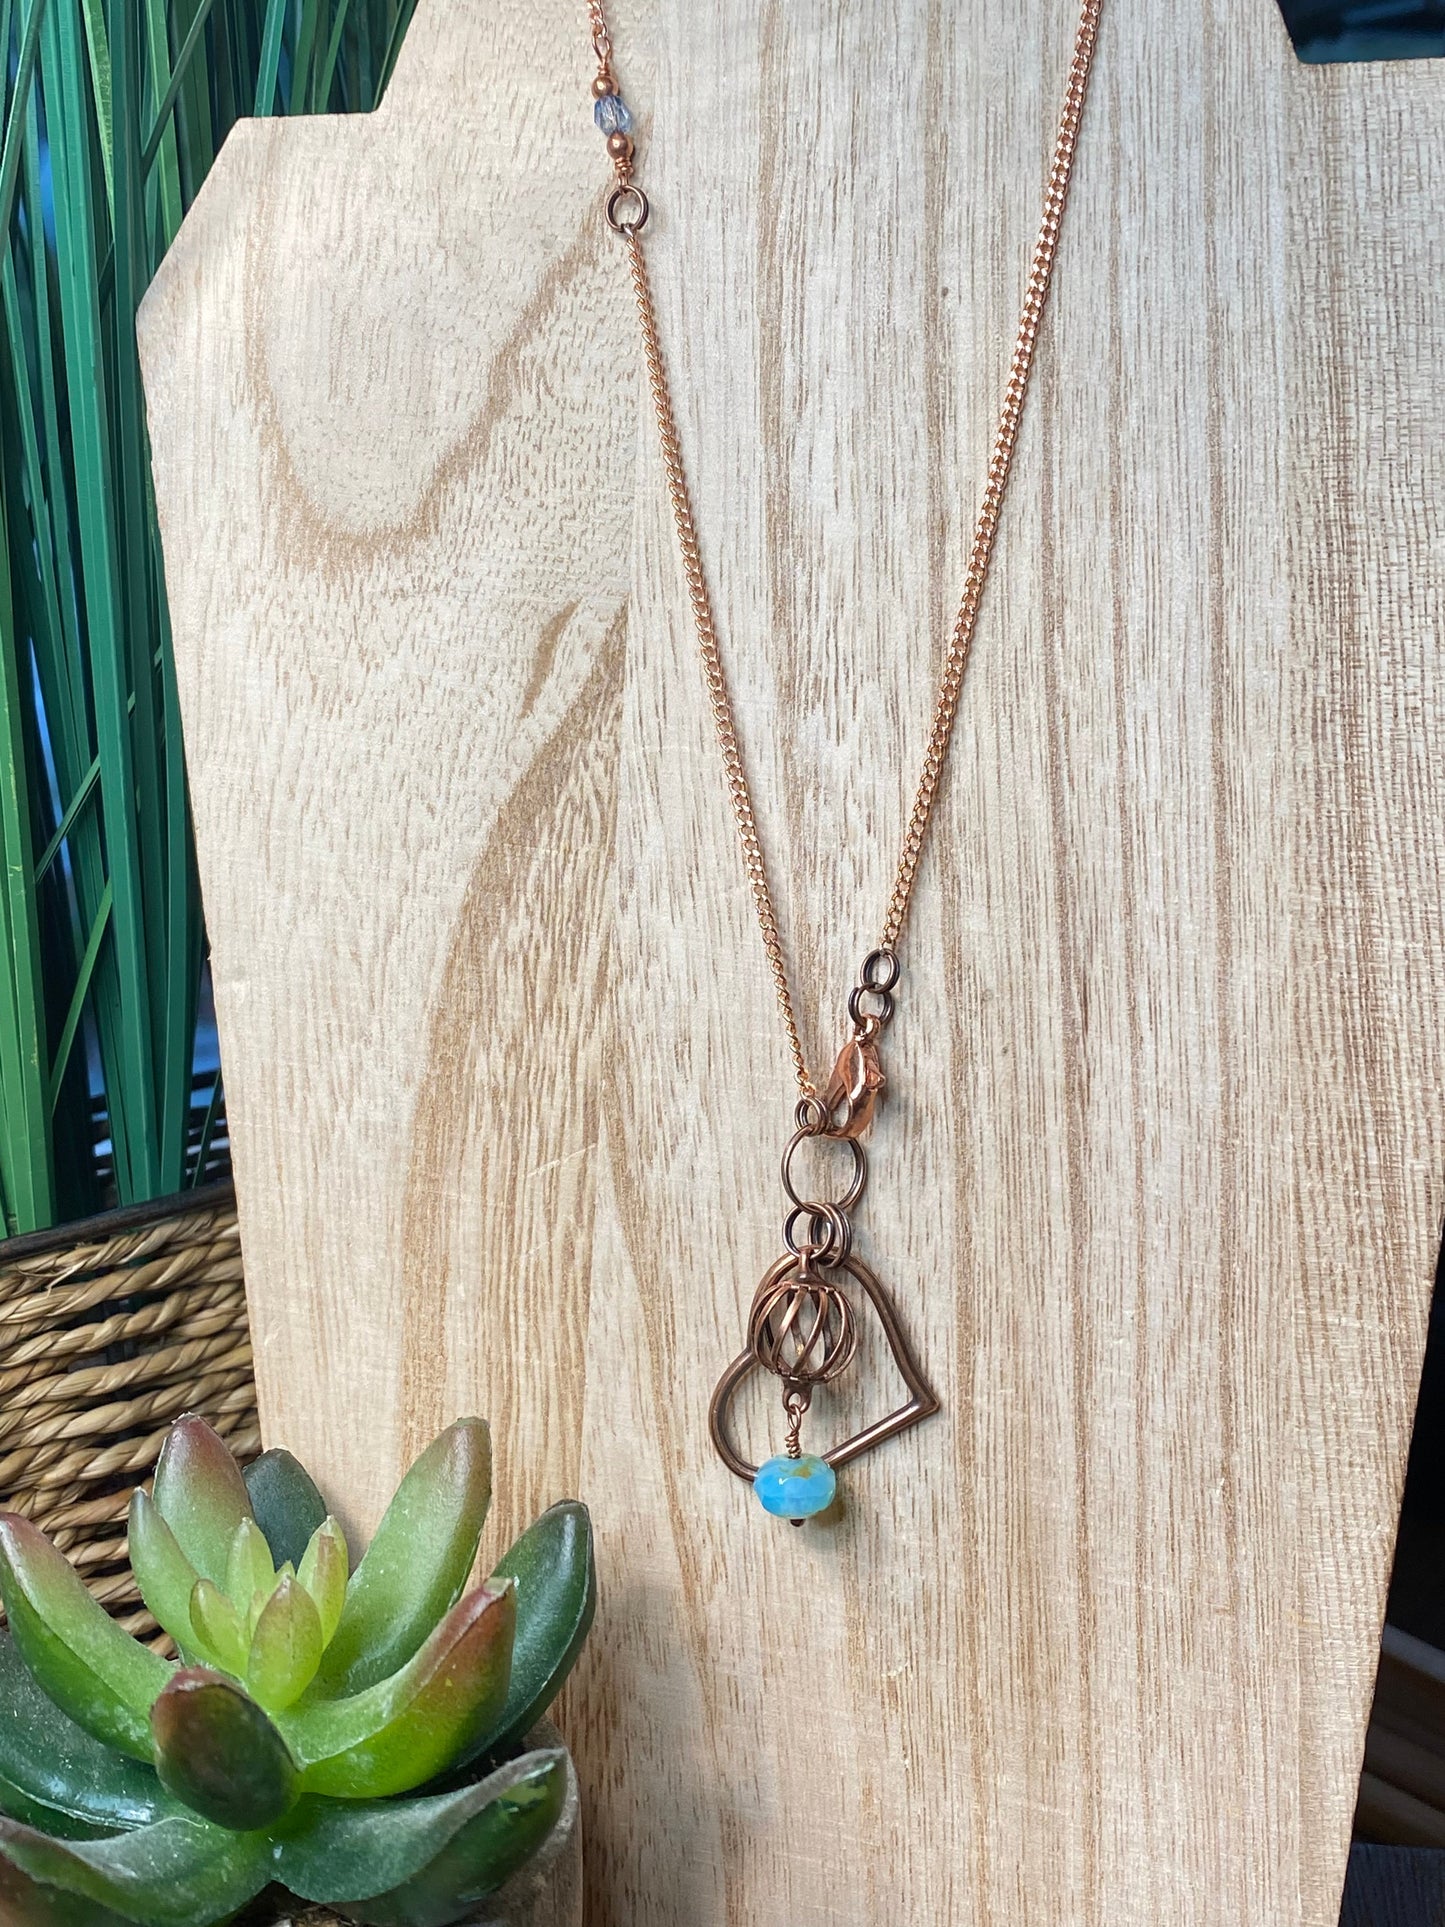 Necklace -30,33,36” Adjustable w/Reclaimed Copper Heart, Sea Blue Czech Faceted Accent, on a Copper Cable Chain